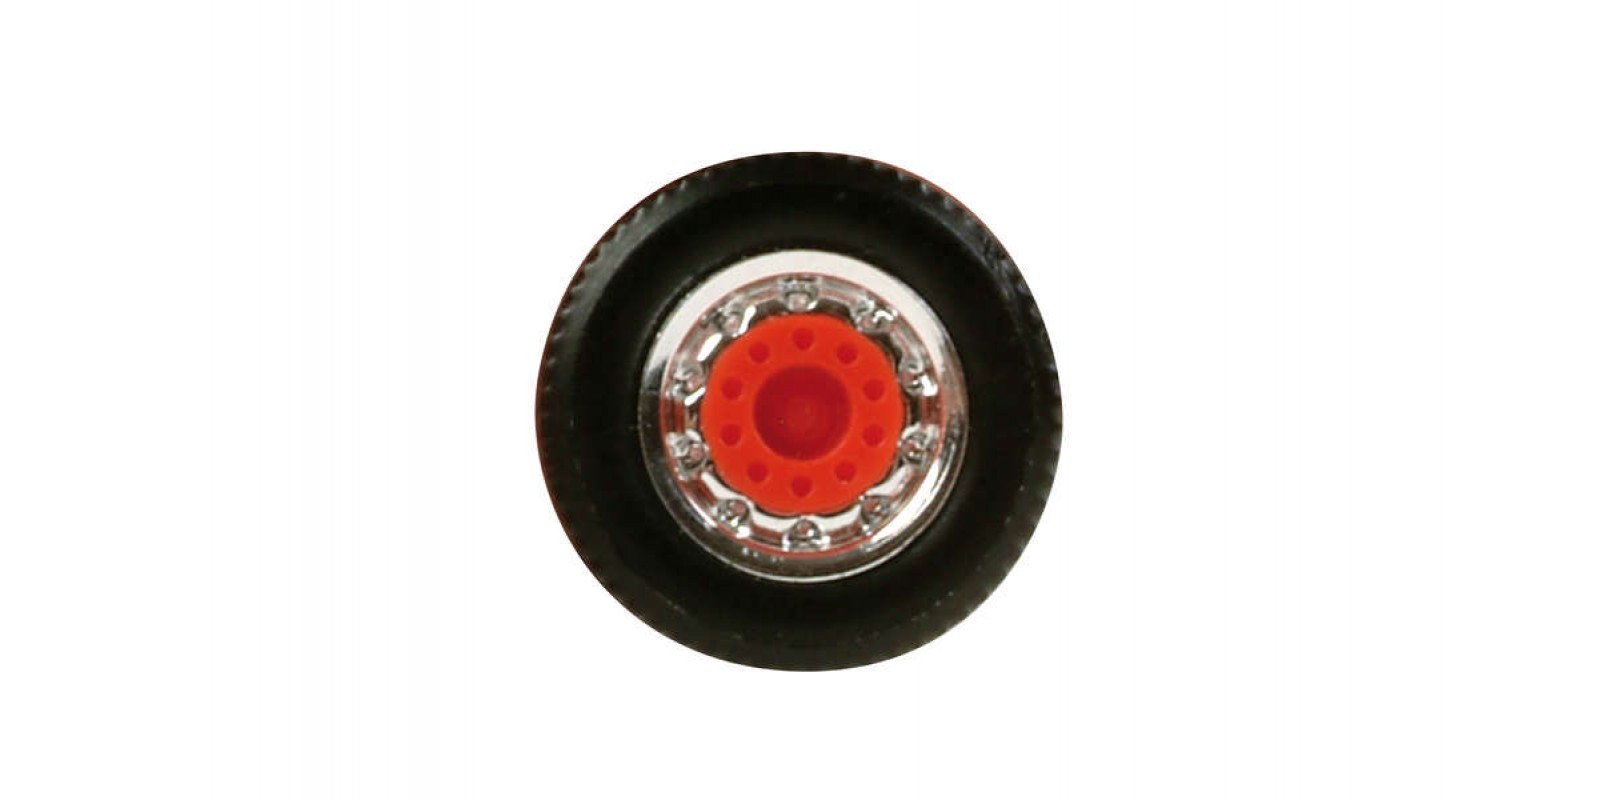 HR051996  WHEELSETS WIDE TIRES FOR TRUCK FRONT AXLE, CHROME / RED